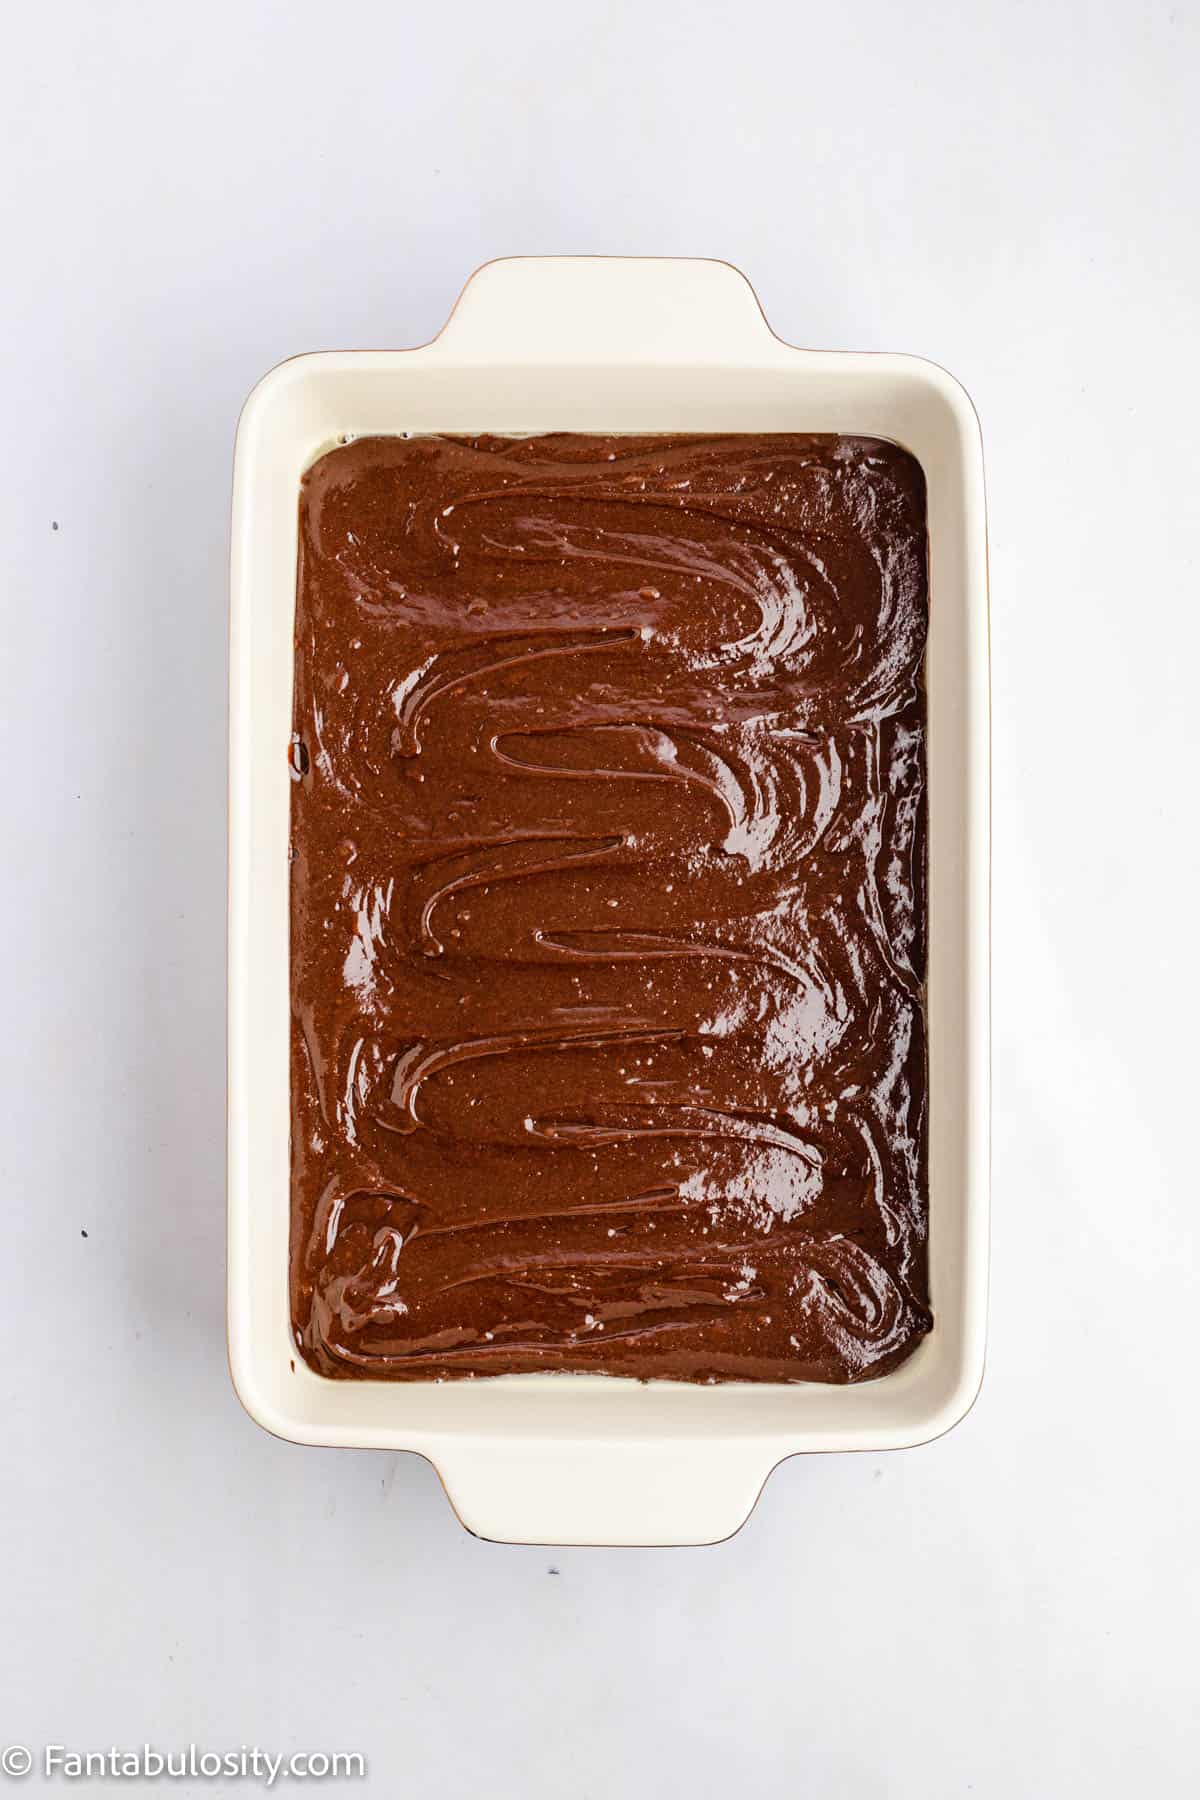 A simple photo with a pan of brownie batter spread in a white 9 inch by 13 inch baking dish